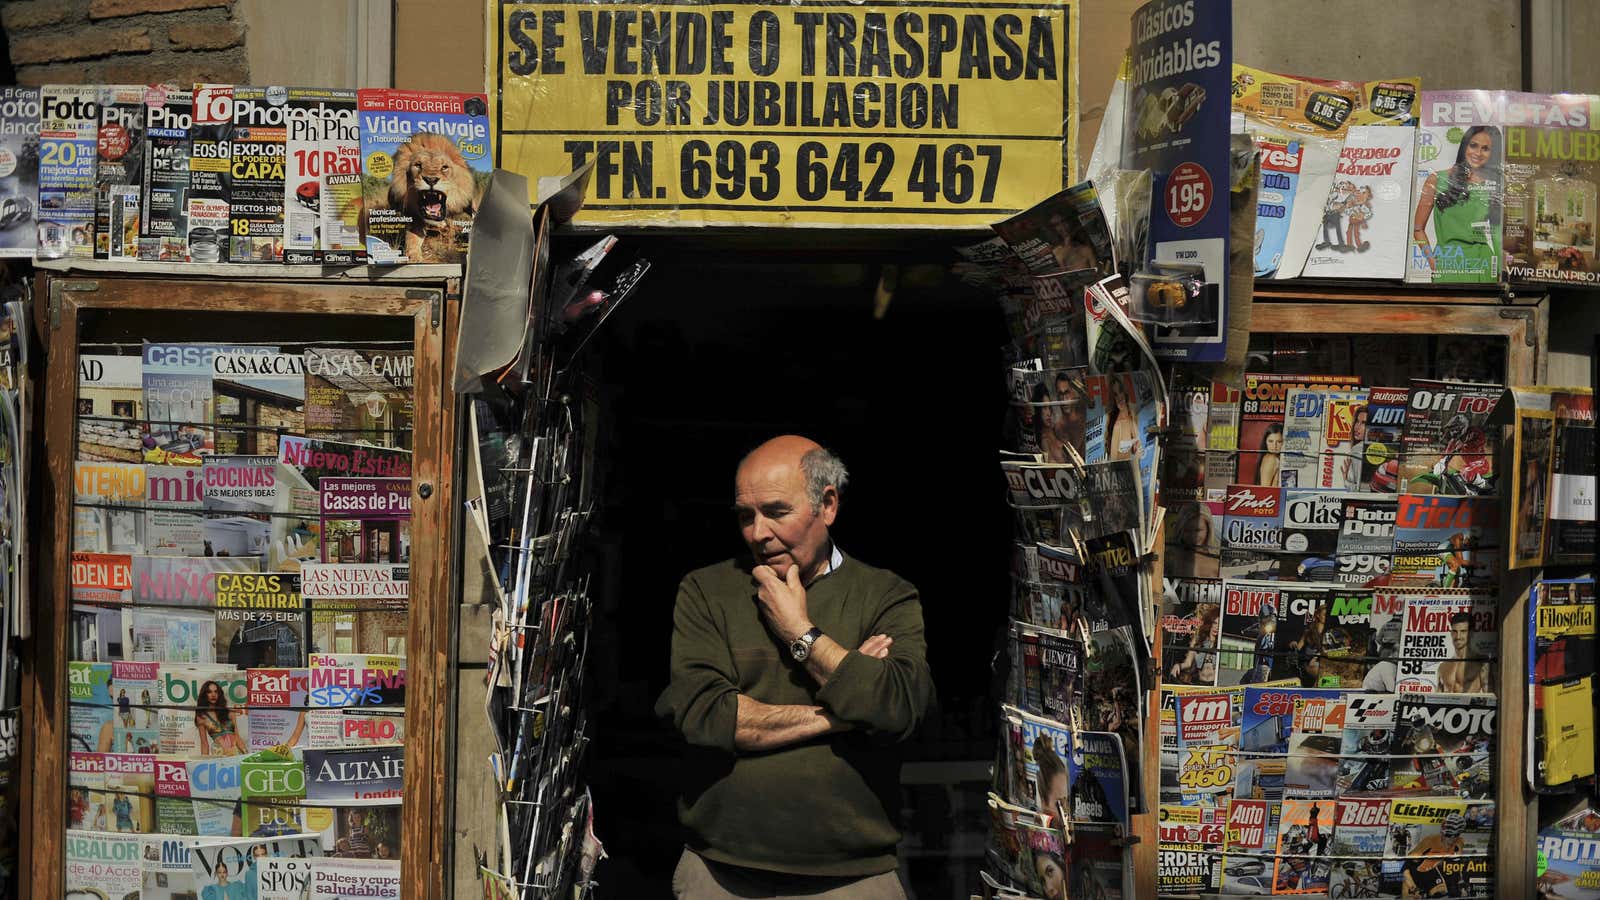 The Spanish newsstand is not a happy place.